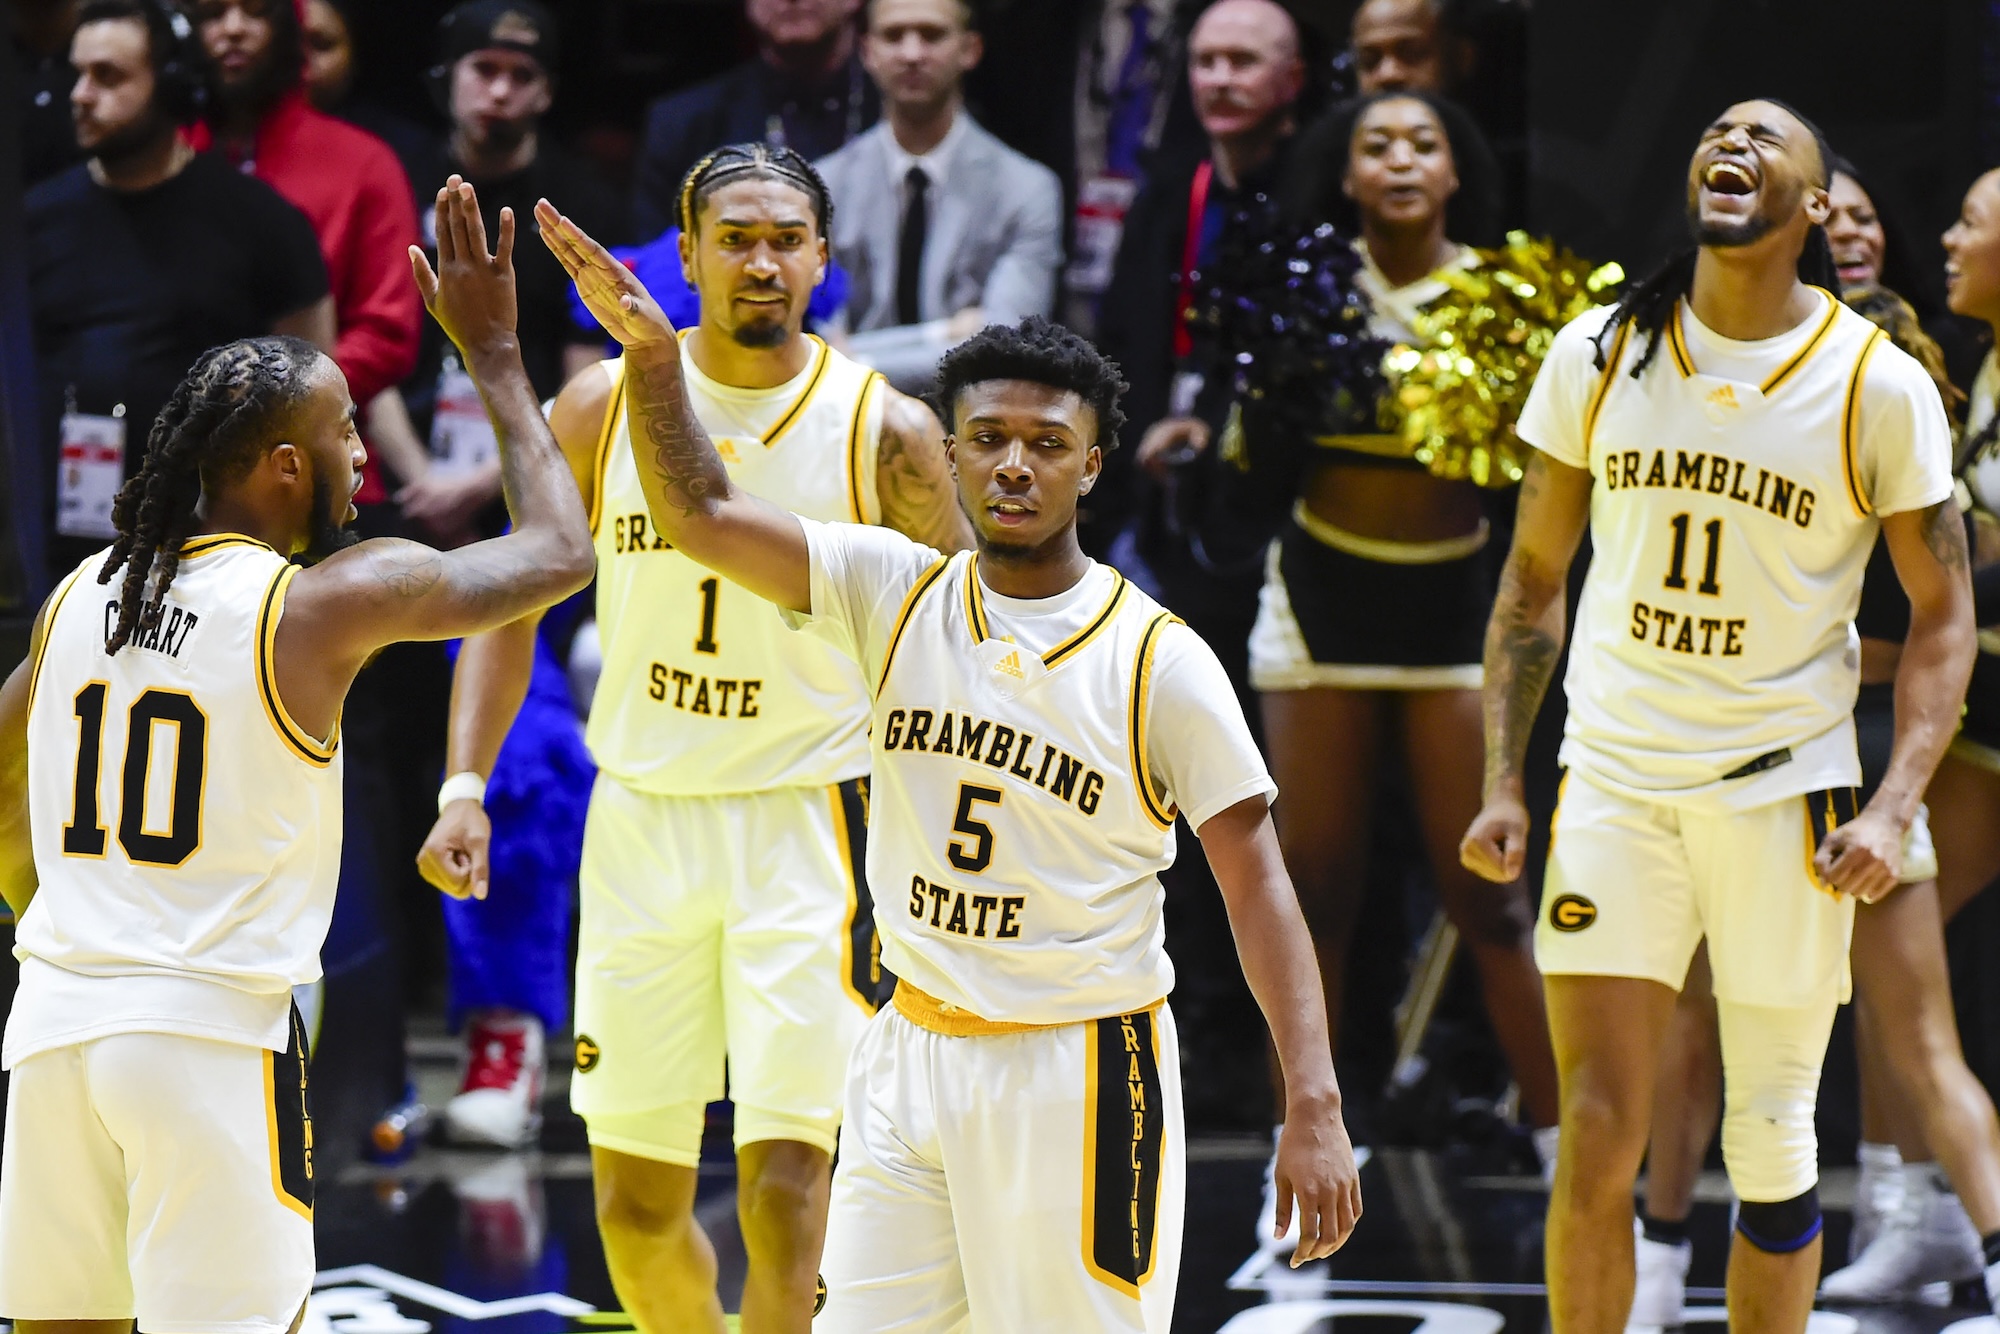 Grambling State University Tigers guard Tra'Michael Moton (5) celebrates with guard Shawndarius Cowart (10) after making a basket against the Southern University Jaguars during overtime at the Jon M. Huntsman Center in Salt Lake City on Feb. 18, 2023.